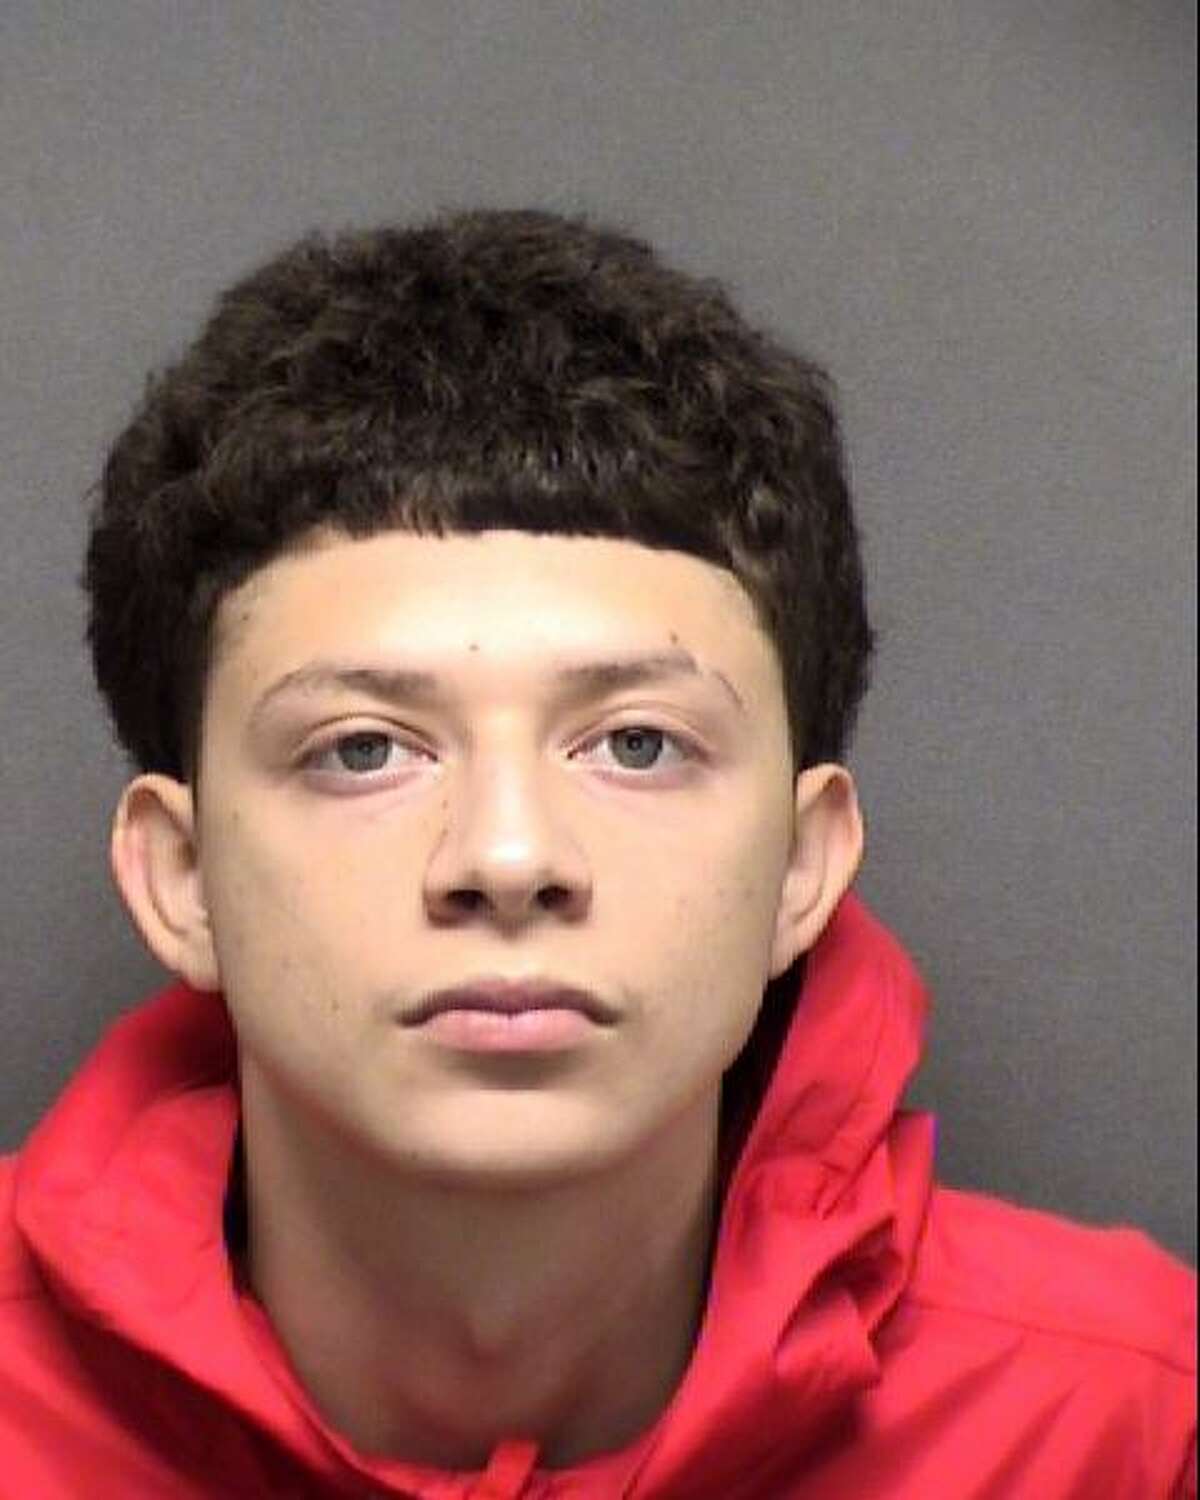 Dorian Rivera, 18, is charged with aggravated sexual assault.